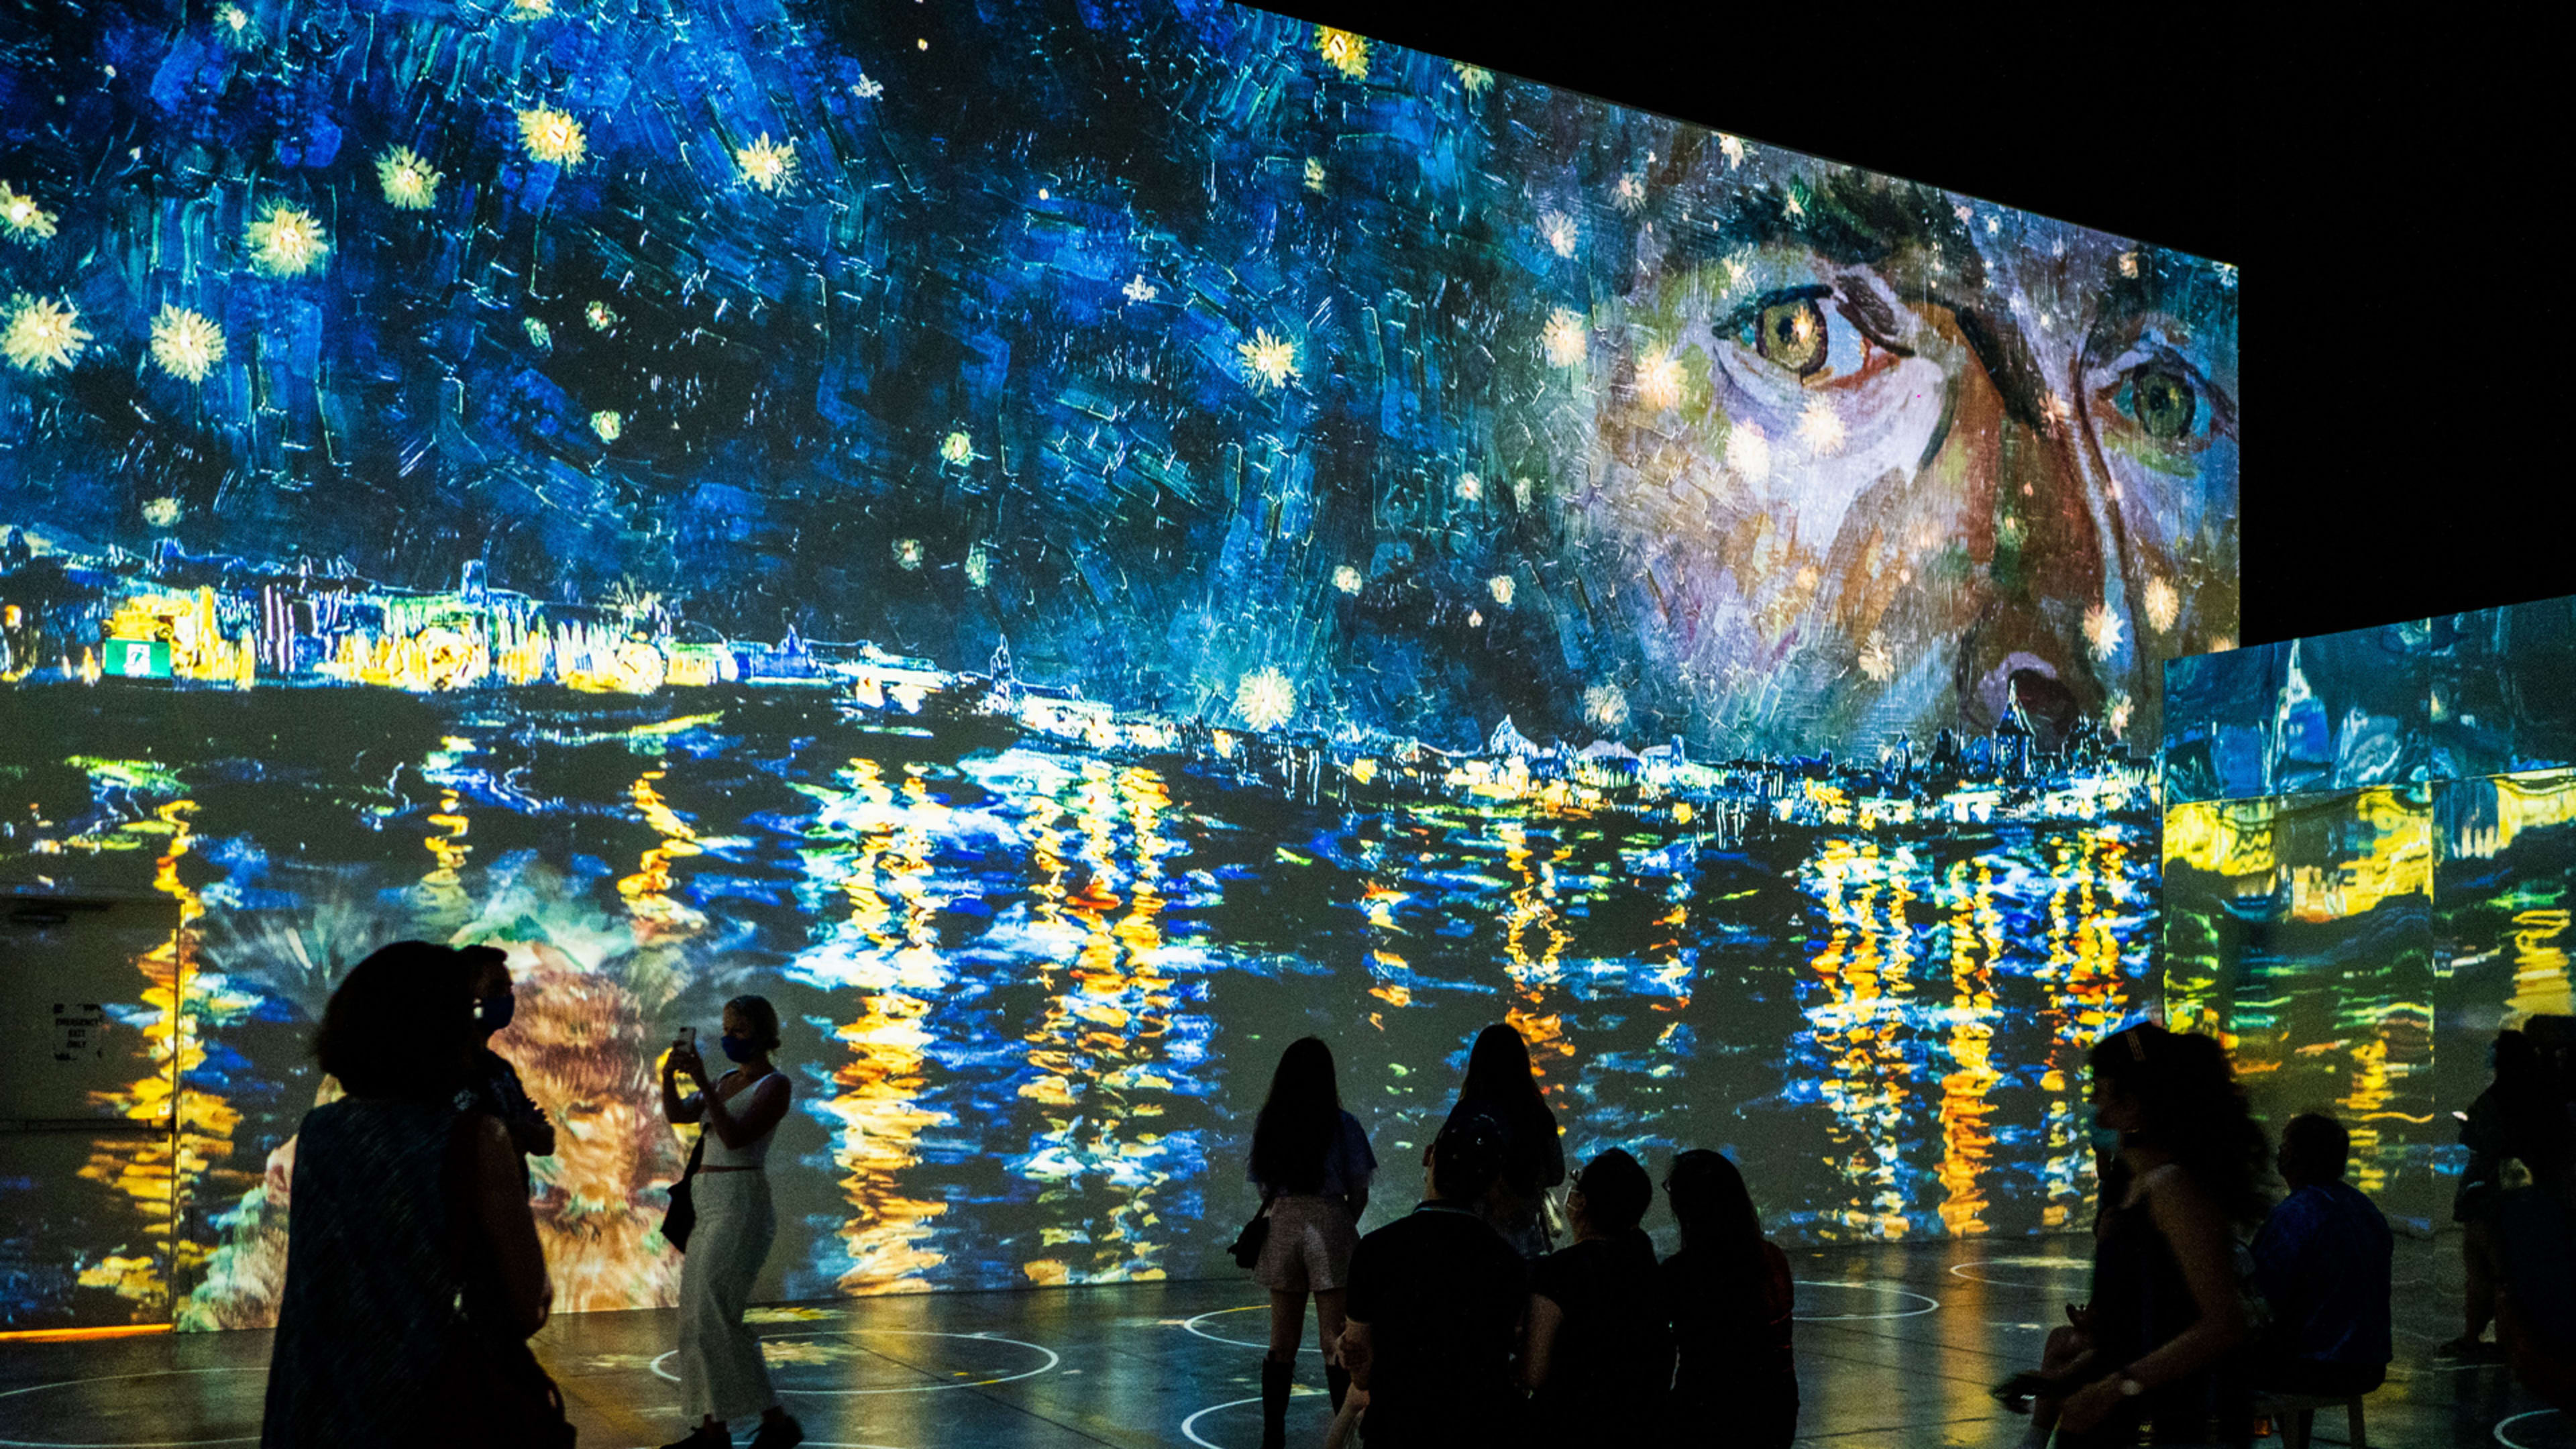 This stunning immersive exhibit explores van Gogh’s art in a whole new way